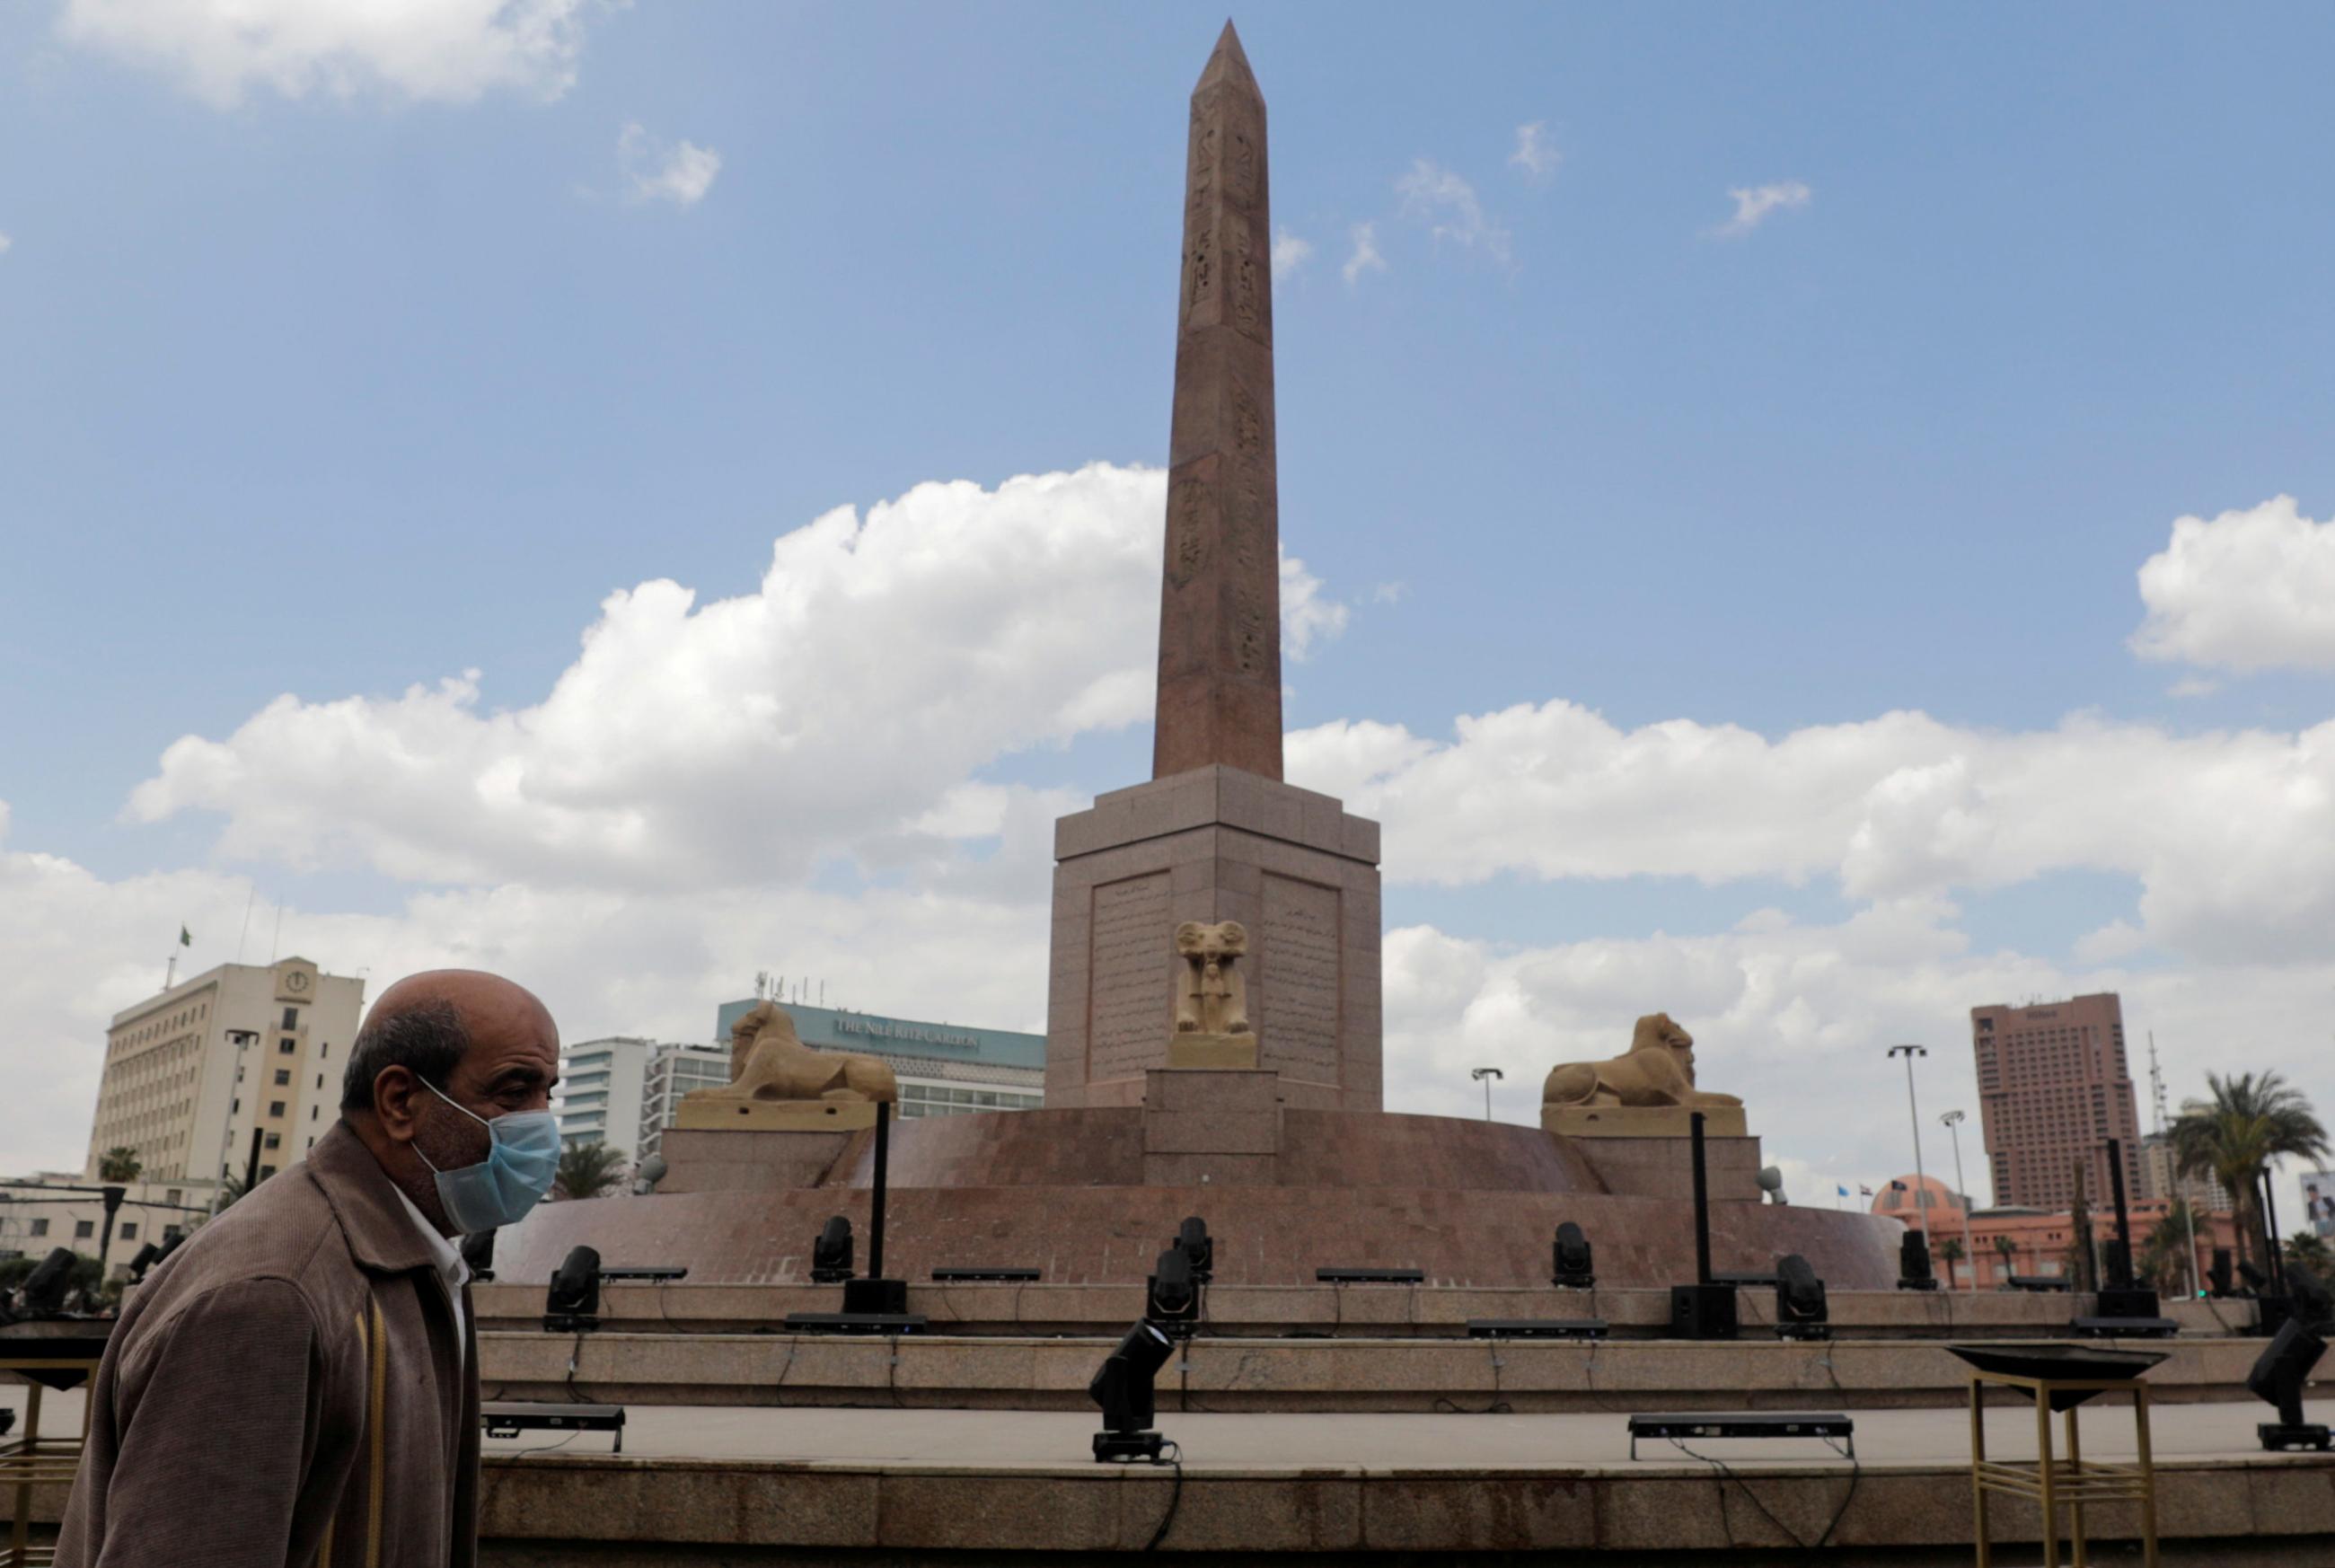 A man walks past the Ramses II obelisk in Tahrir Square in Cairo, Egypt on April 1, 2021. on 